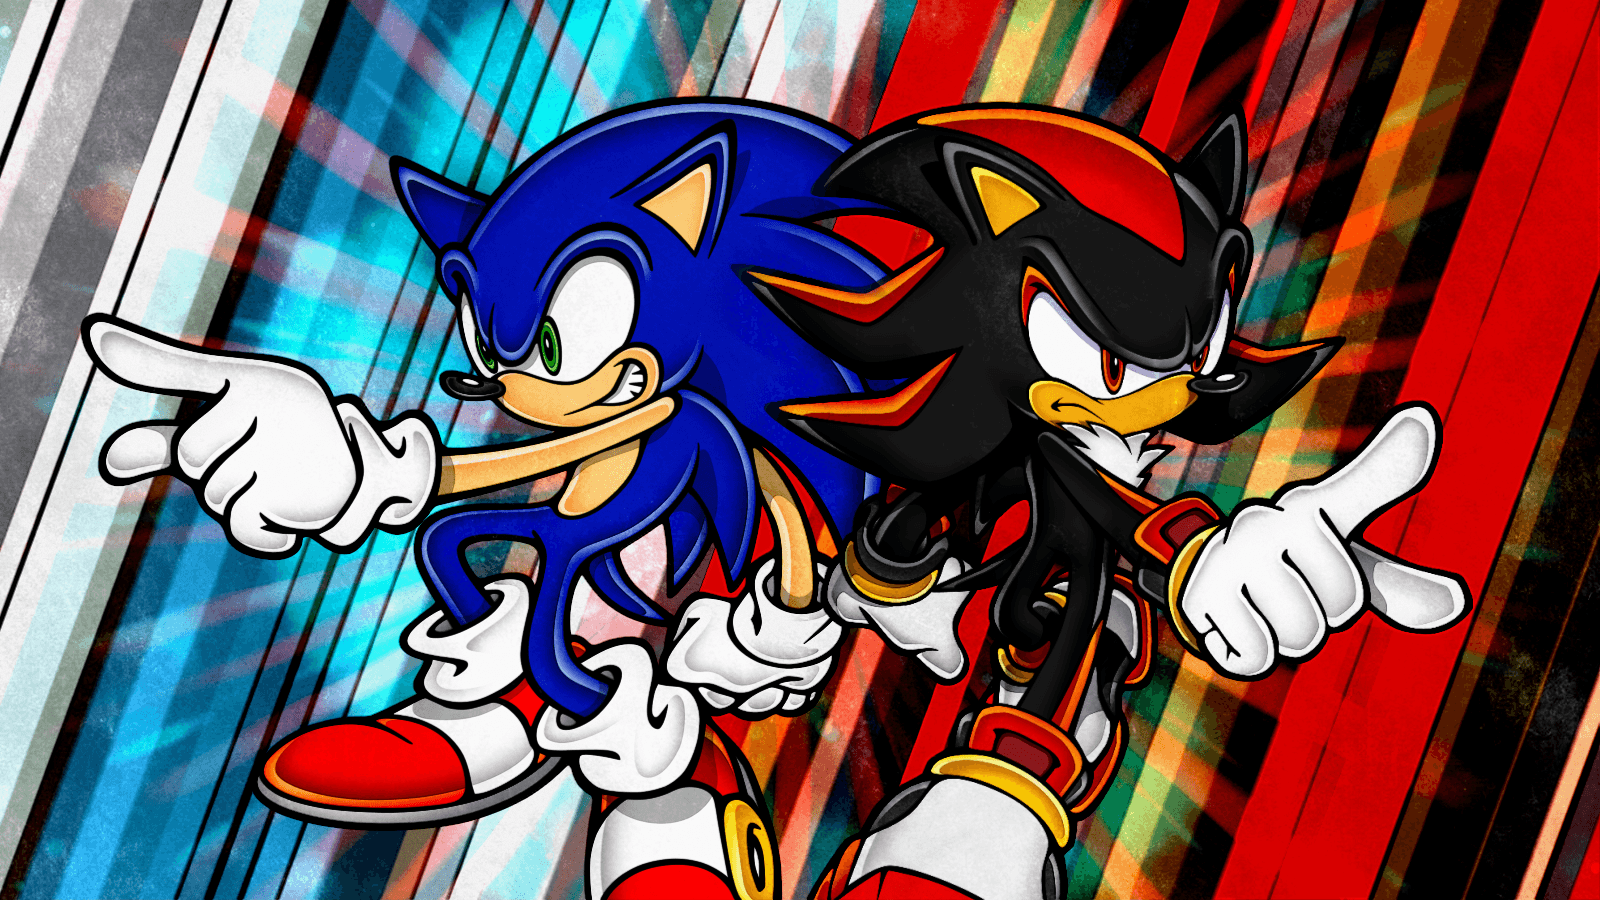 100+] Sonic And Shadow Wallpapers